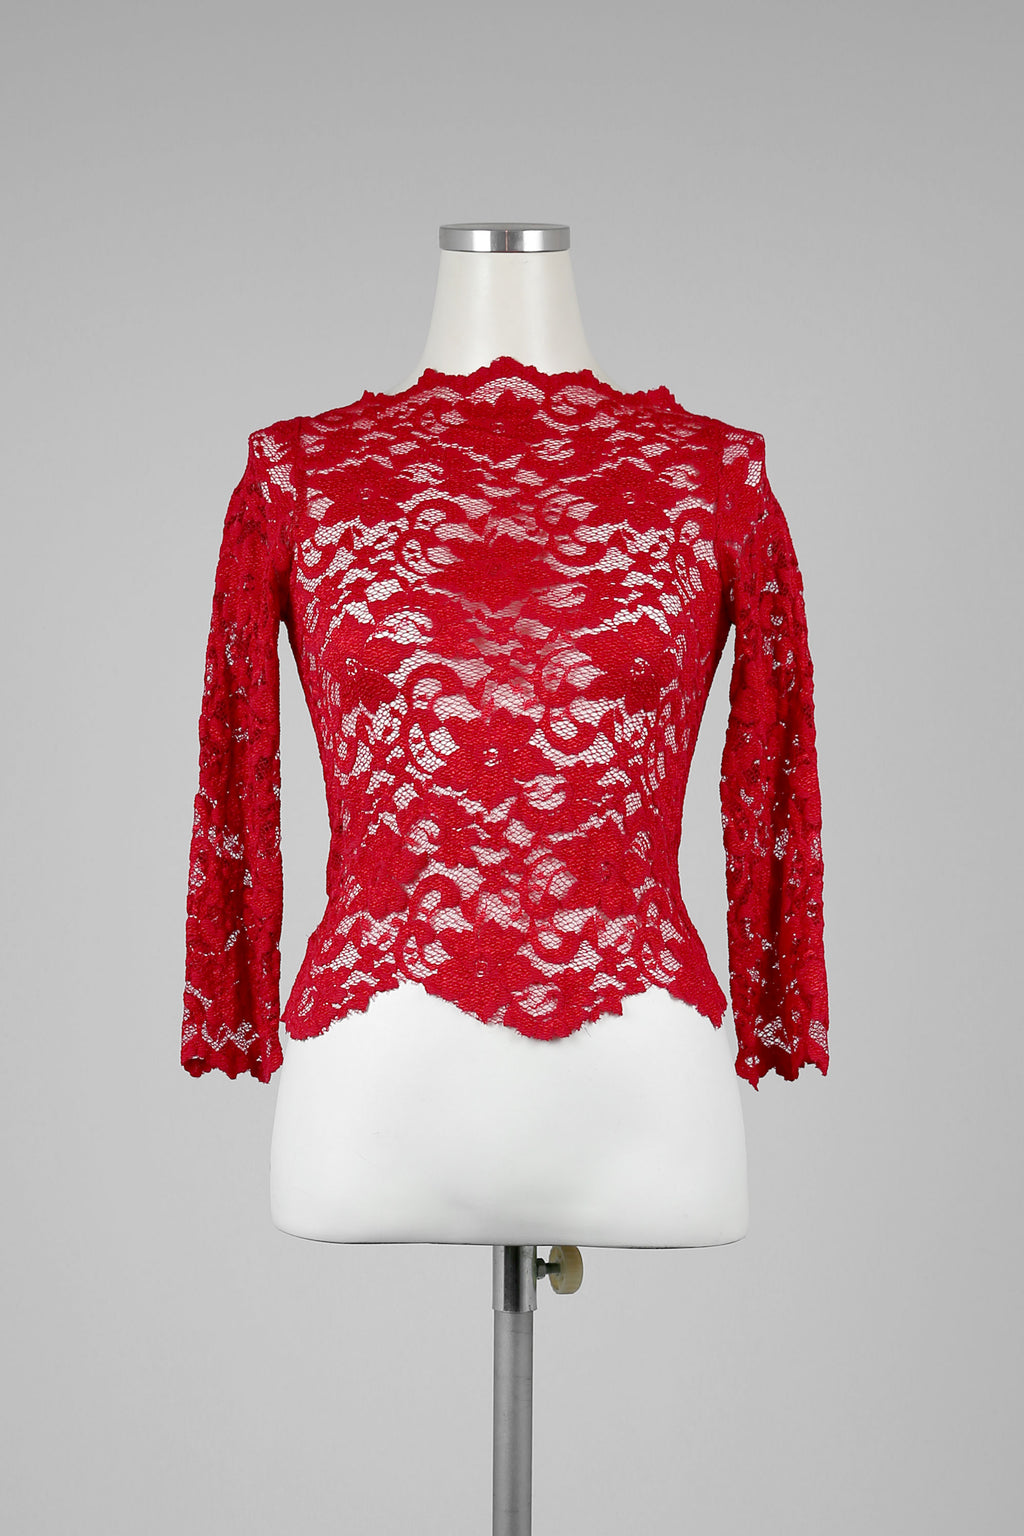 Scalloped Red Lace Top - Tae With Jane NY